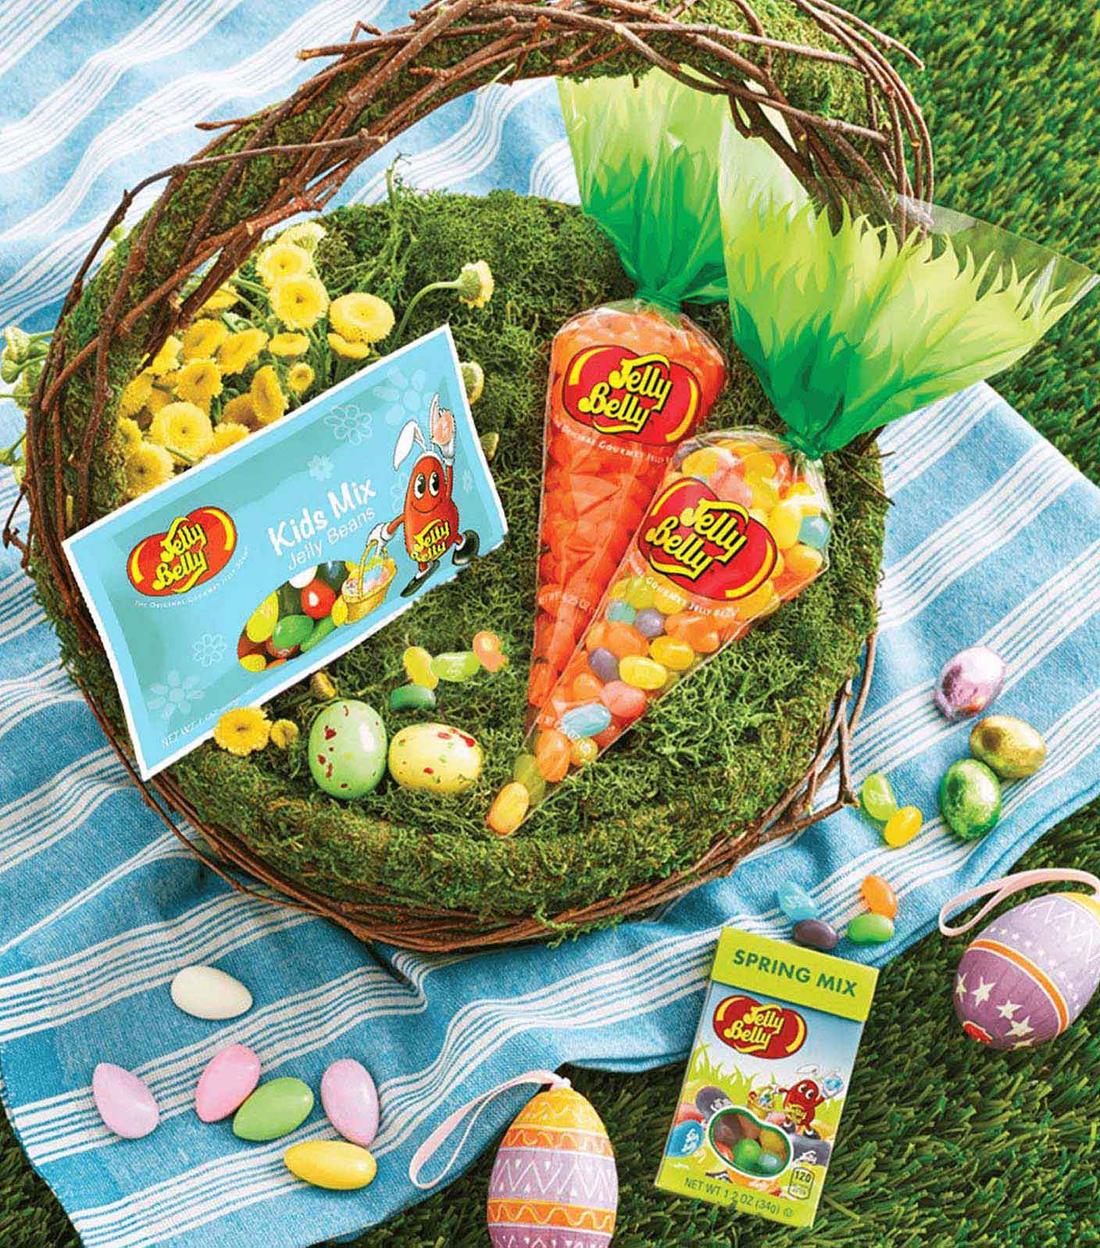 Easter Basket filled with Jelly Belly Carrot Bags, Easter Kids Mix 1 oz Bags, and Speckled Chocolate Malted Eggs, on a blue blanket in the grass